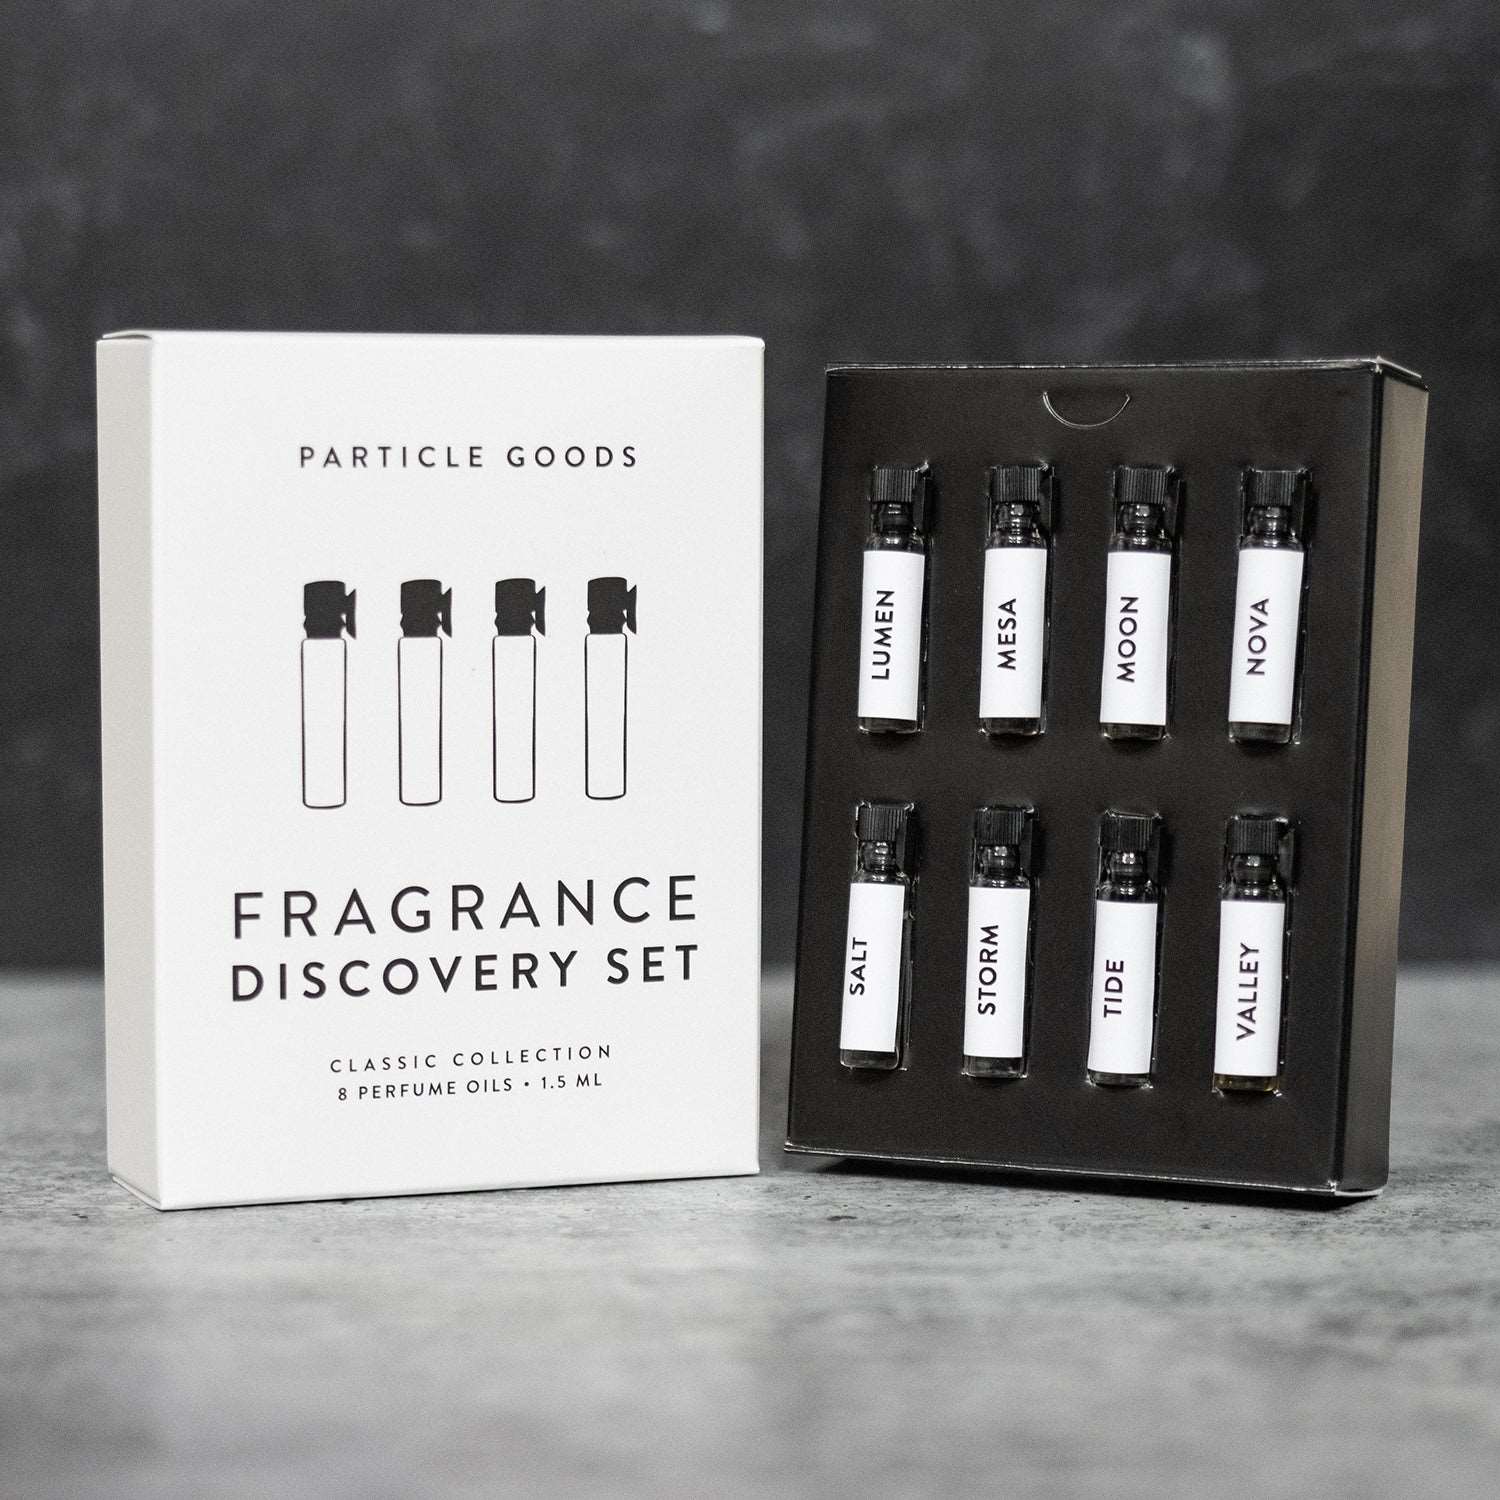 Classic Fragrance Discovery Set